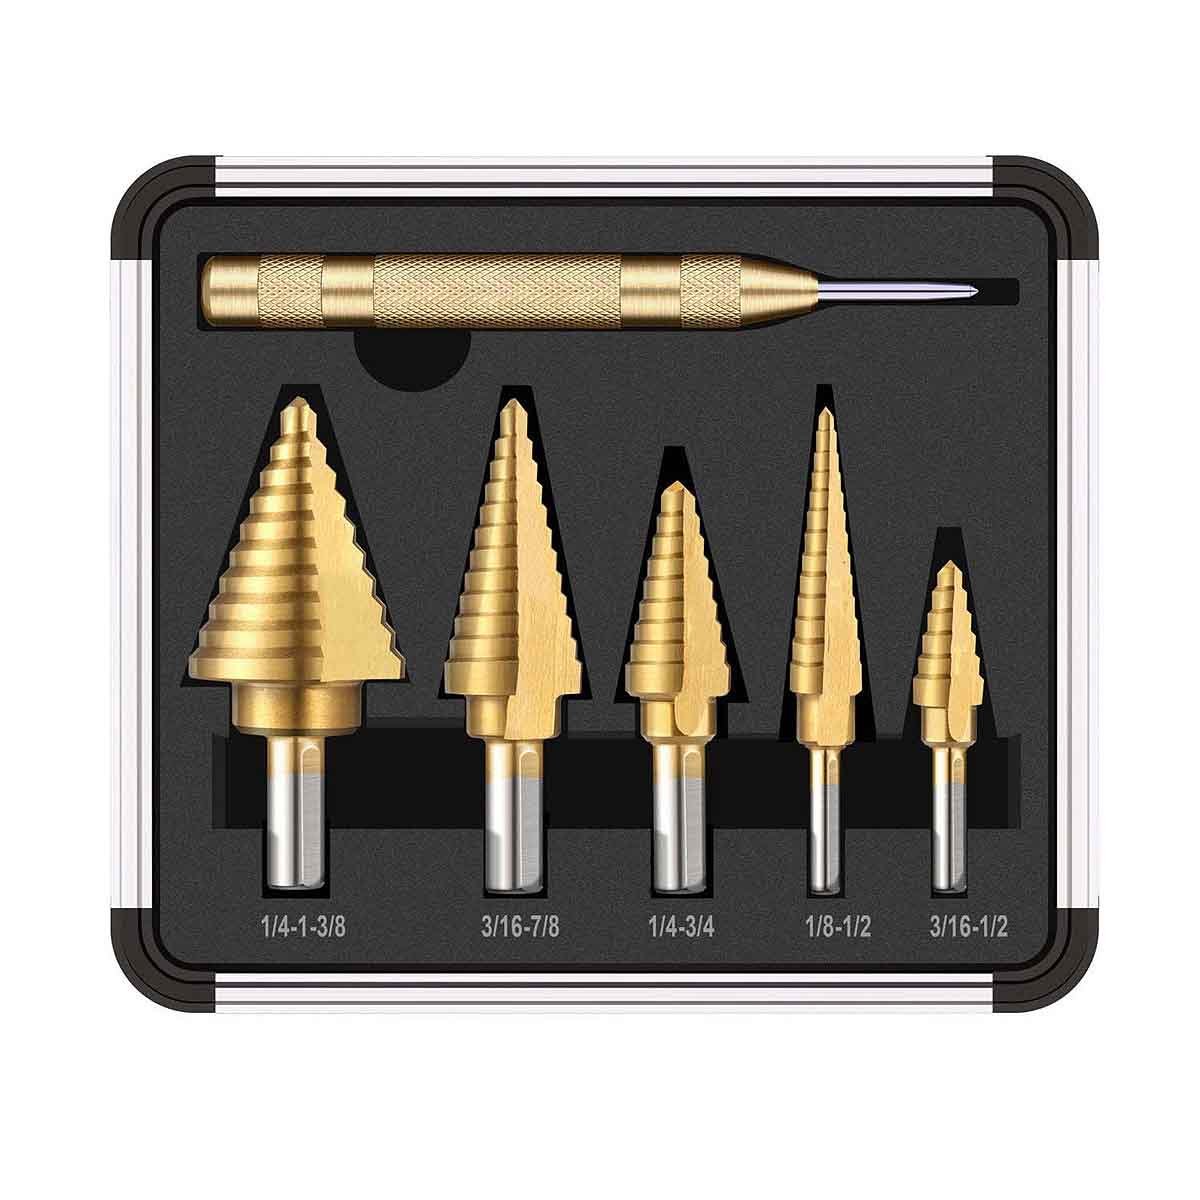 Drill - bits | HOWN - STORE hown-store.blogspot.com/search/label/D… #rtArtBoost #rtitbot #UKEtsyRT #advertising @hown_store @sme_rt @rttanks #retweet #like #Sales #advertising #freeads #usa #promotions #hownstore